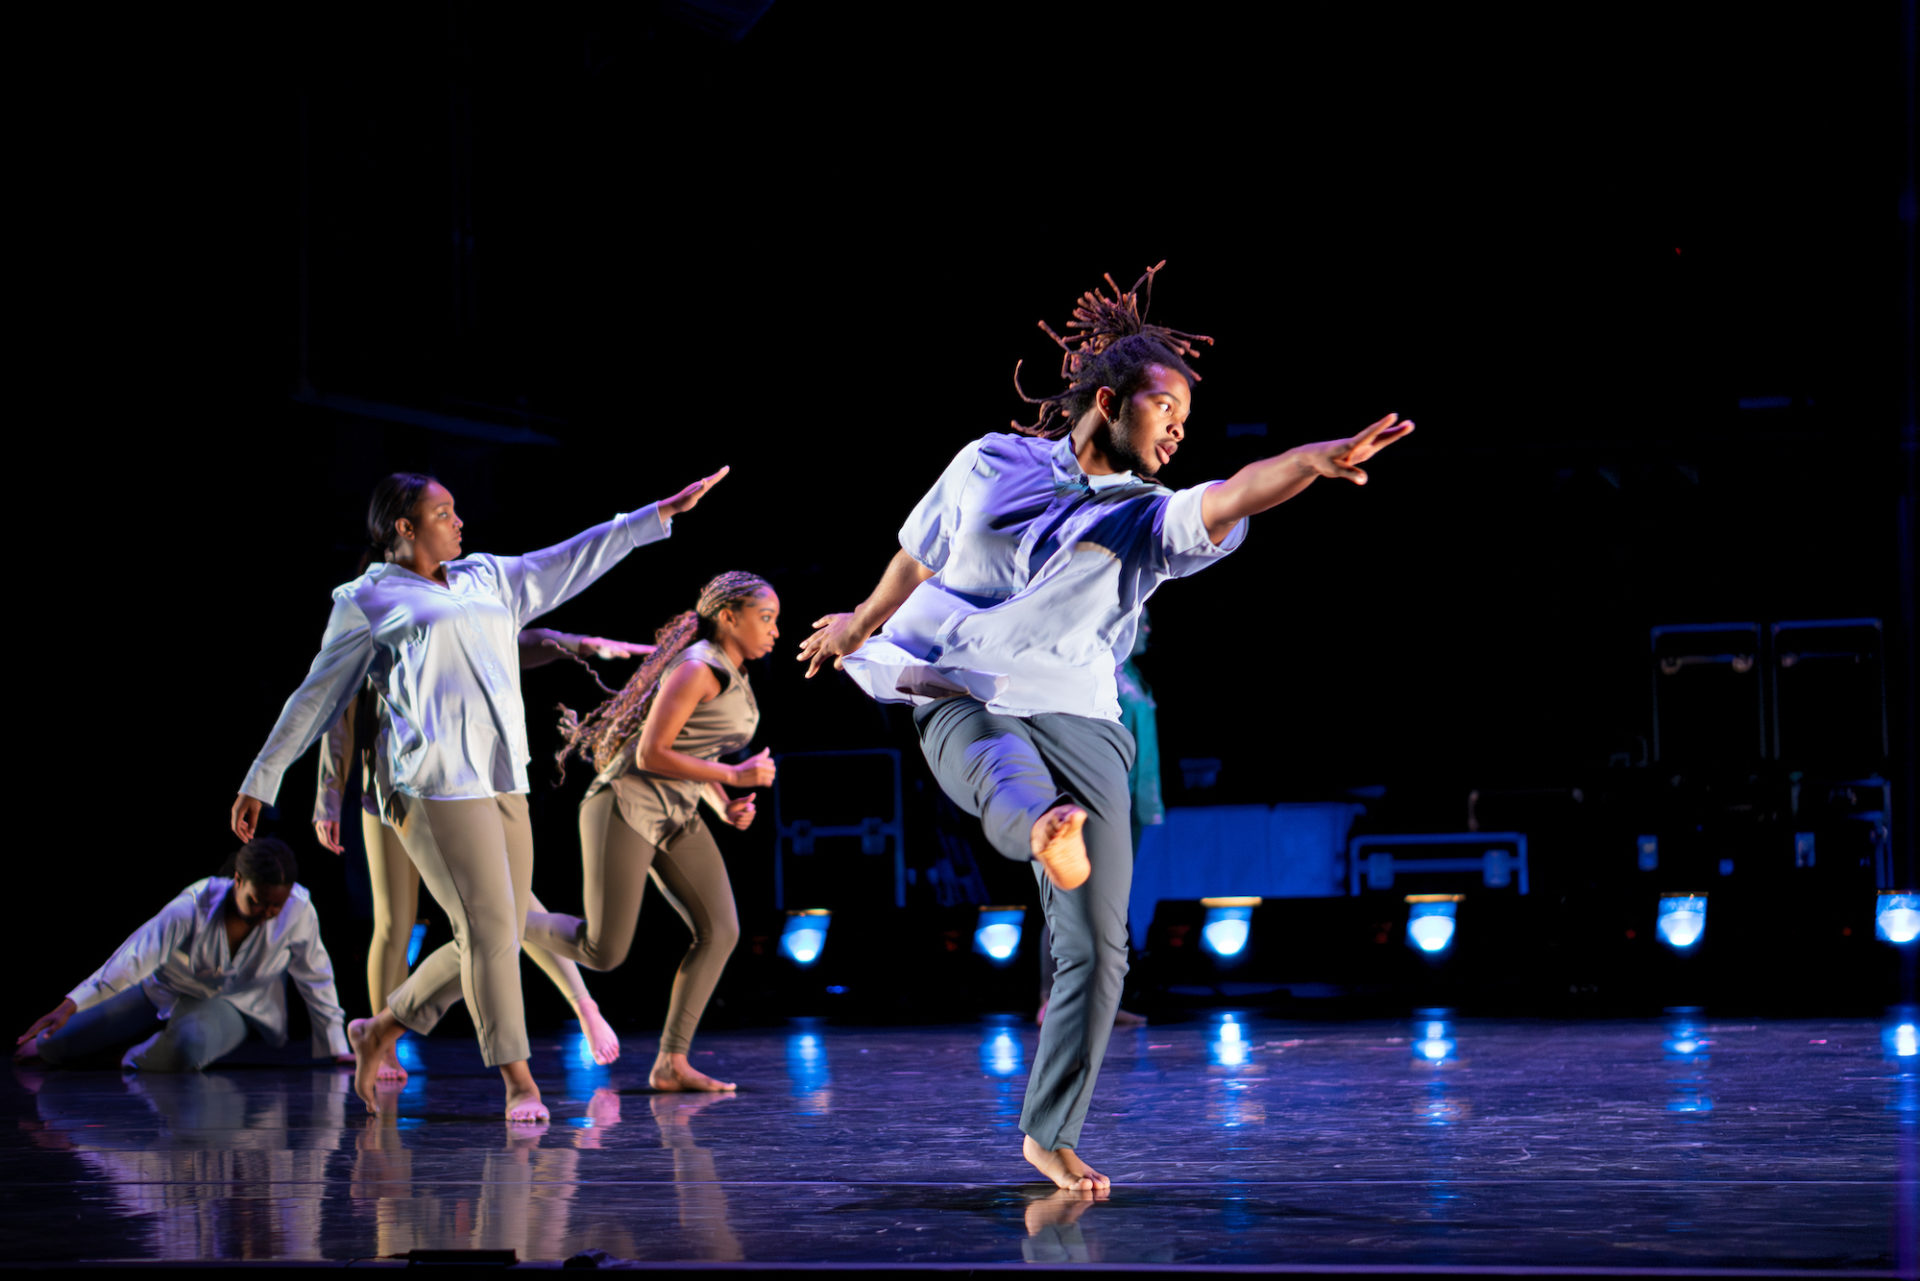 A male Black dancer is front and center with other dancers behind performing a modern dance with arms outstretched. They are all wearing blues and neutrals satin long sleeve tops and leggings.